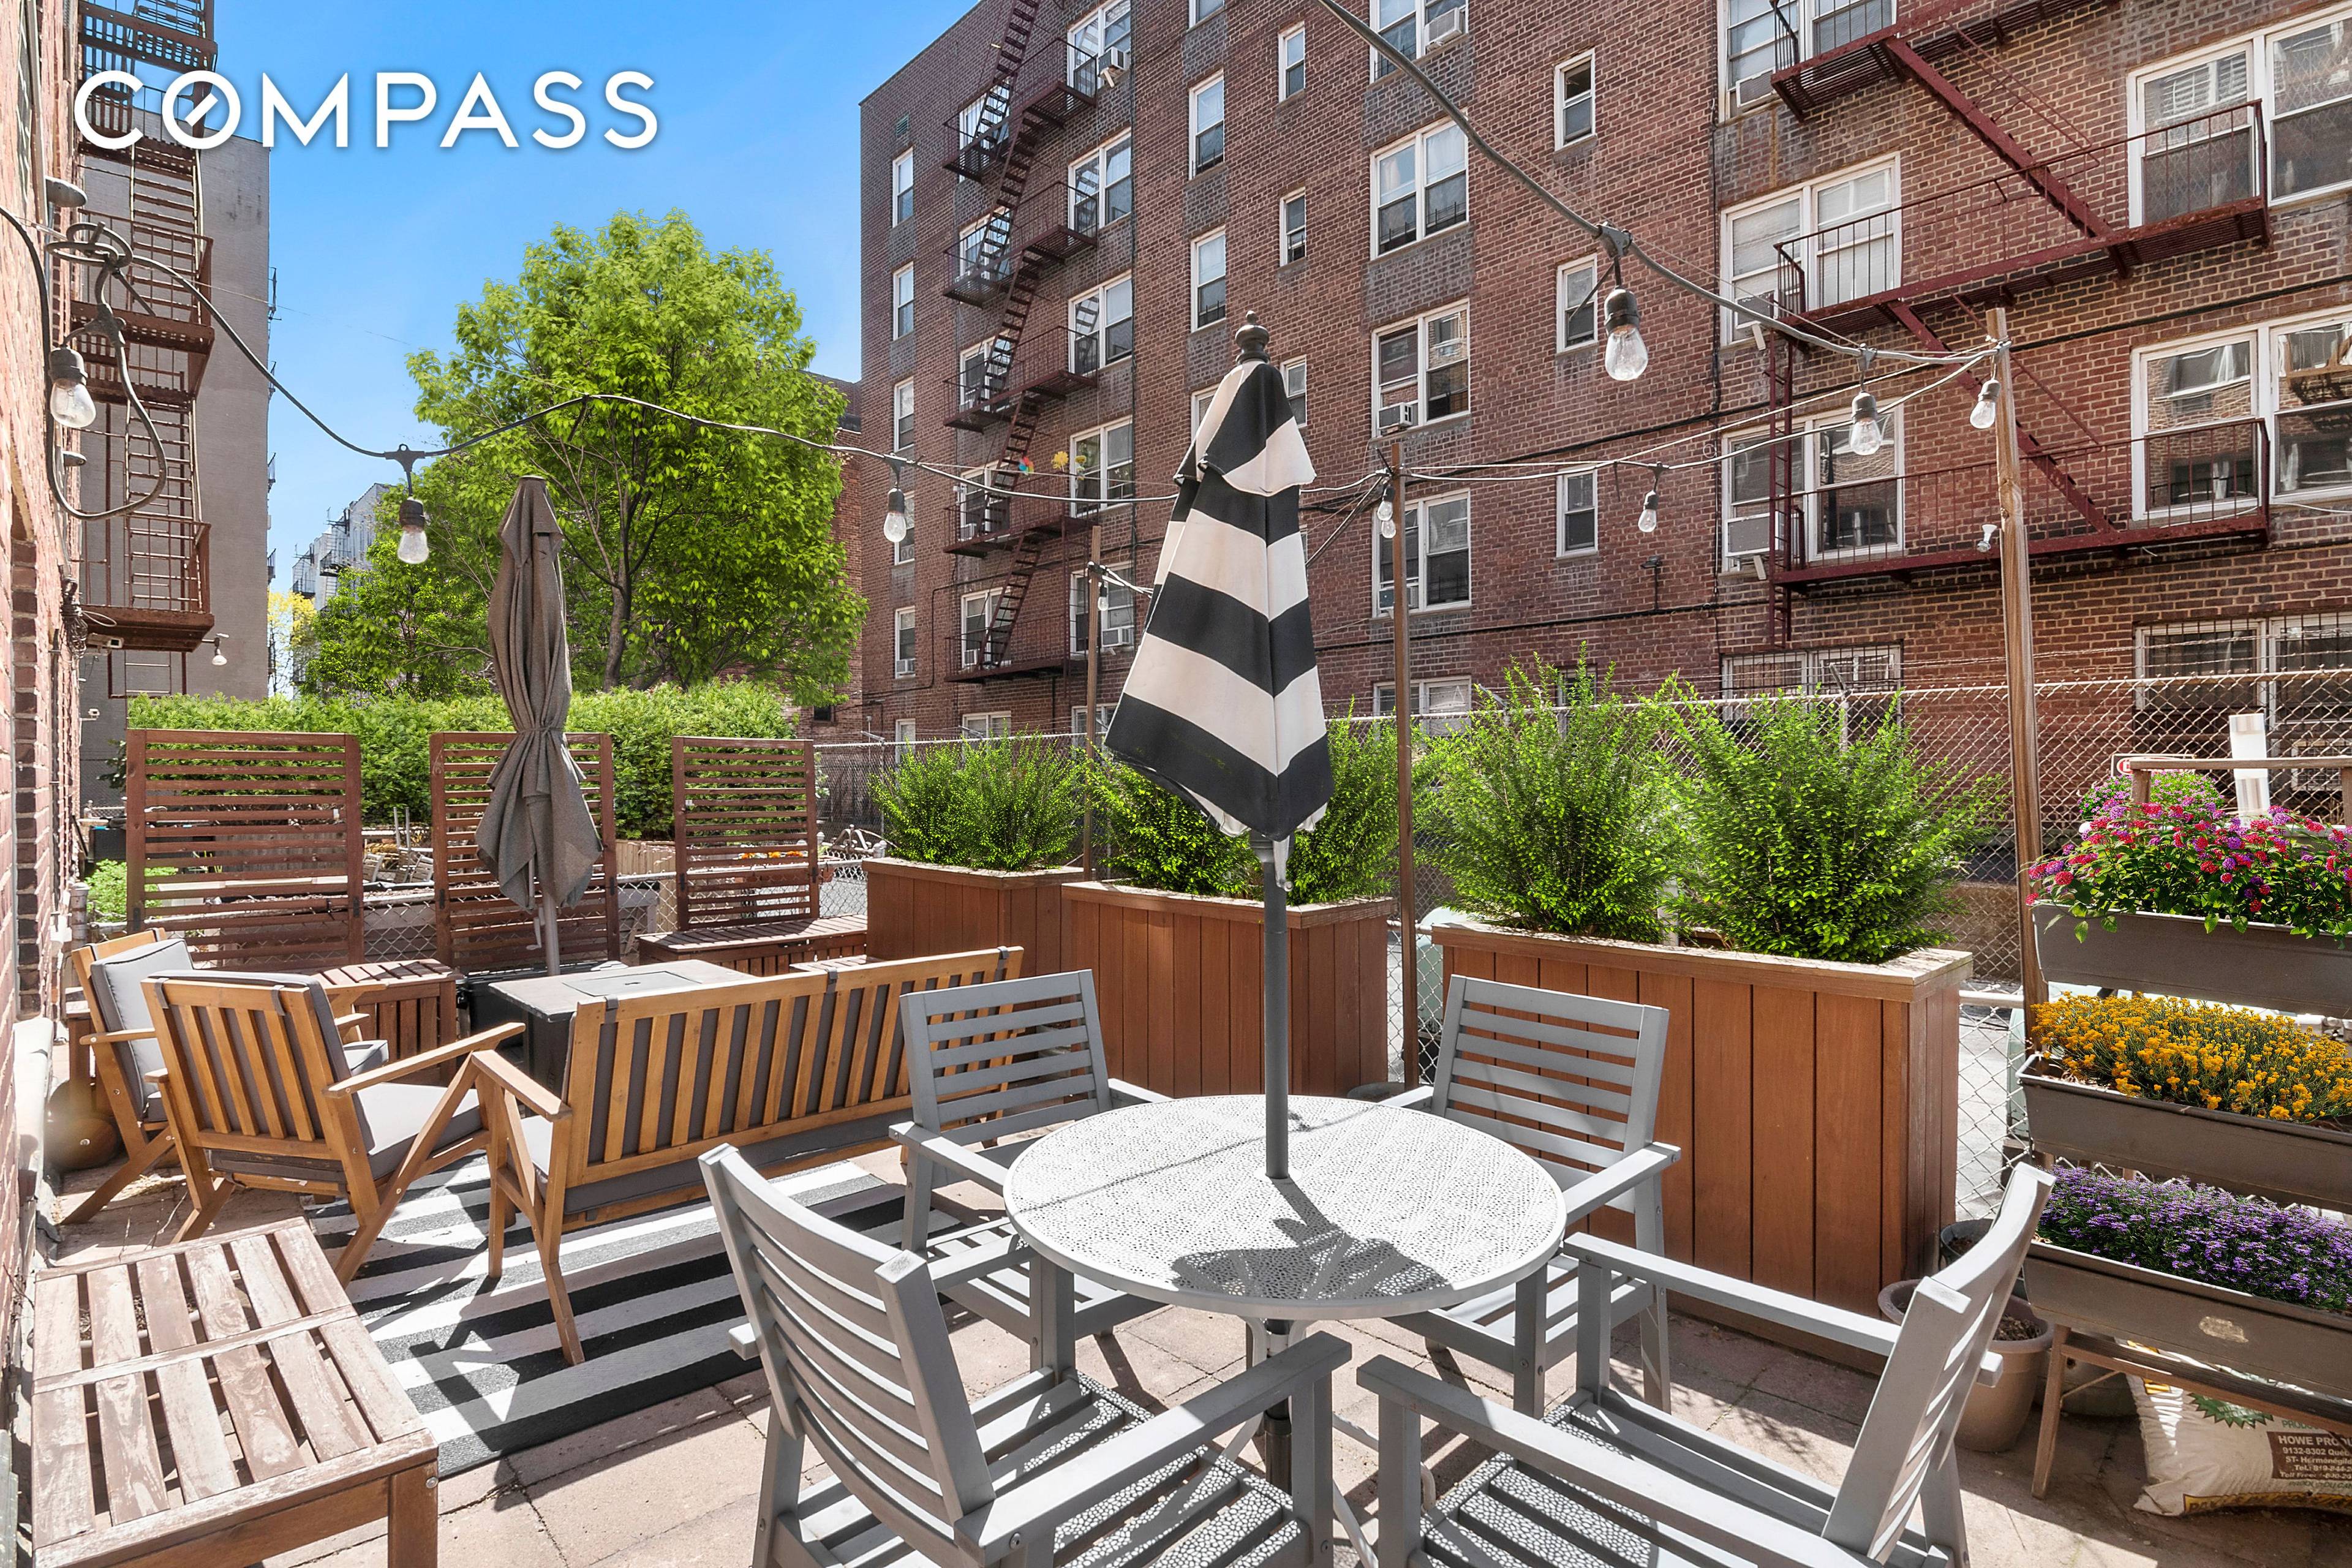 Get ready for summer in this chic, renovated one bed, one bath with a private terrace big enough for multiple seating areas and plantings, too.